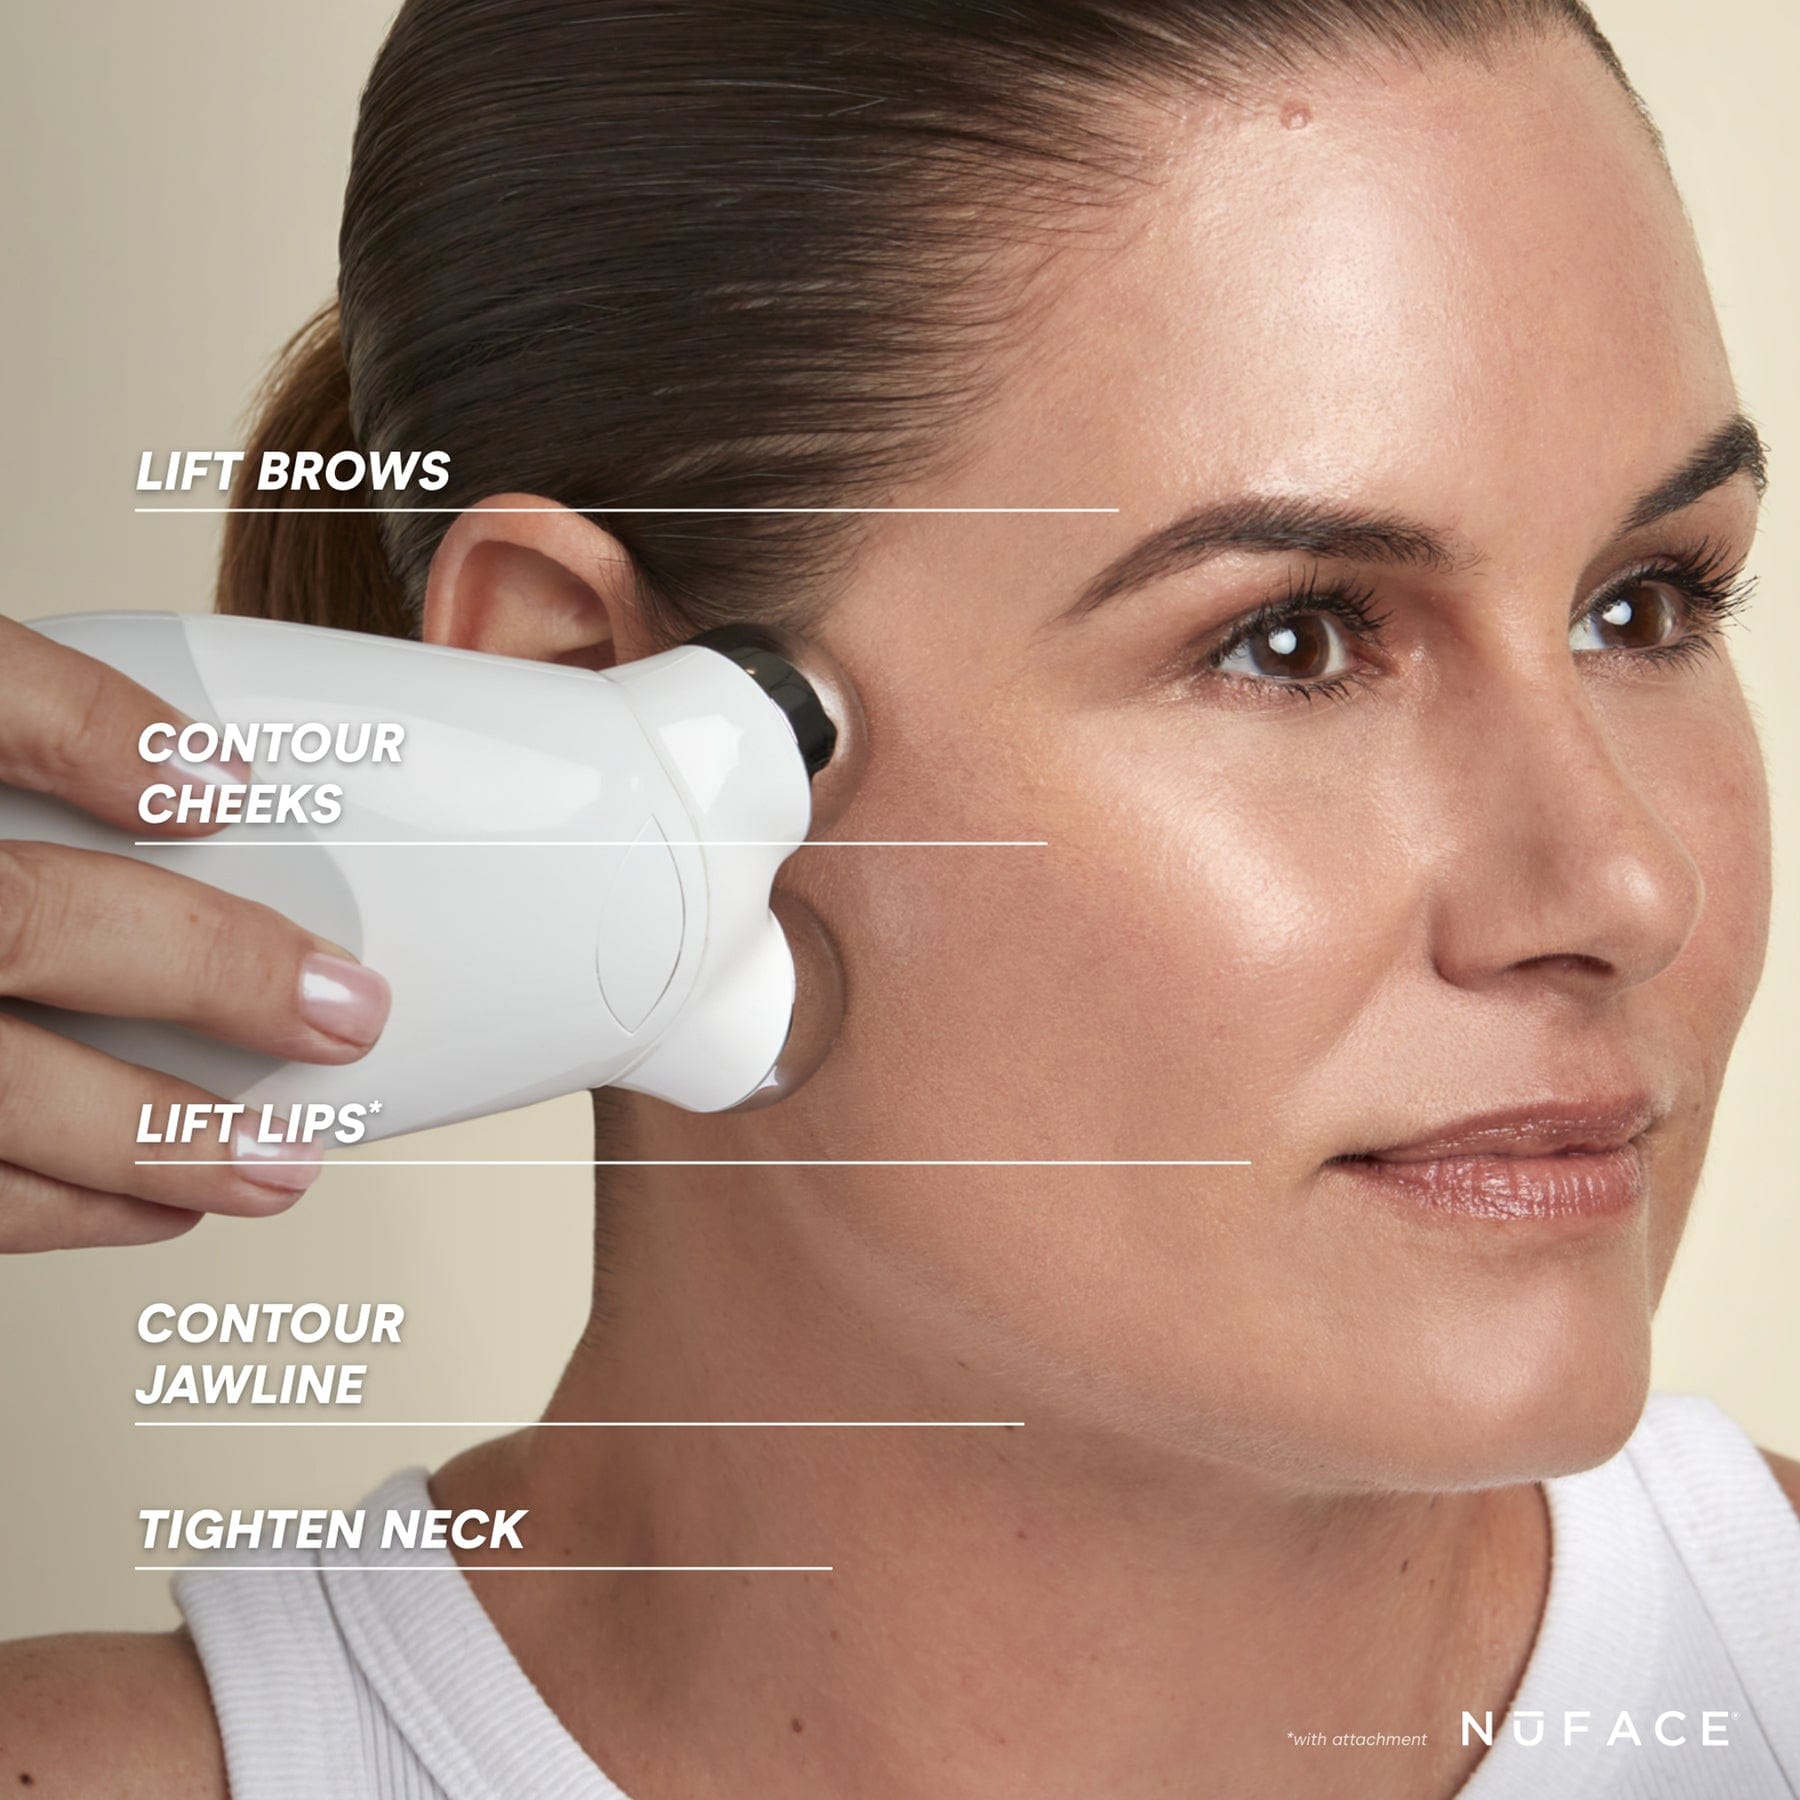 NuFACE Trinity® and Wrinkle Reducer - Gift Set